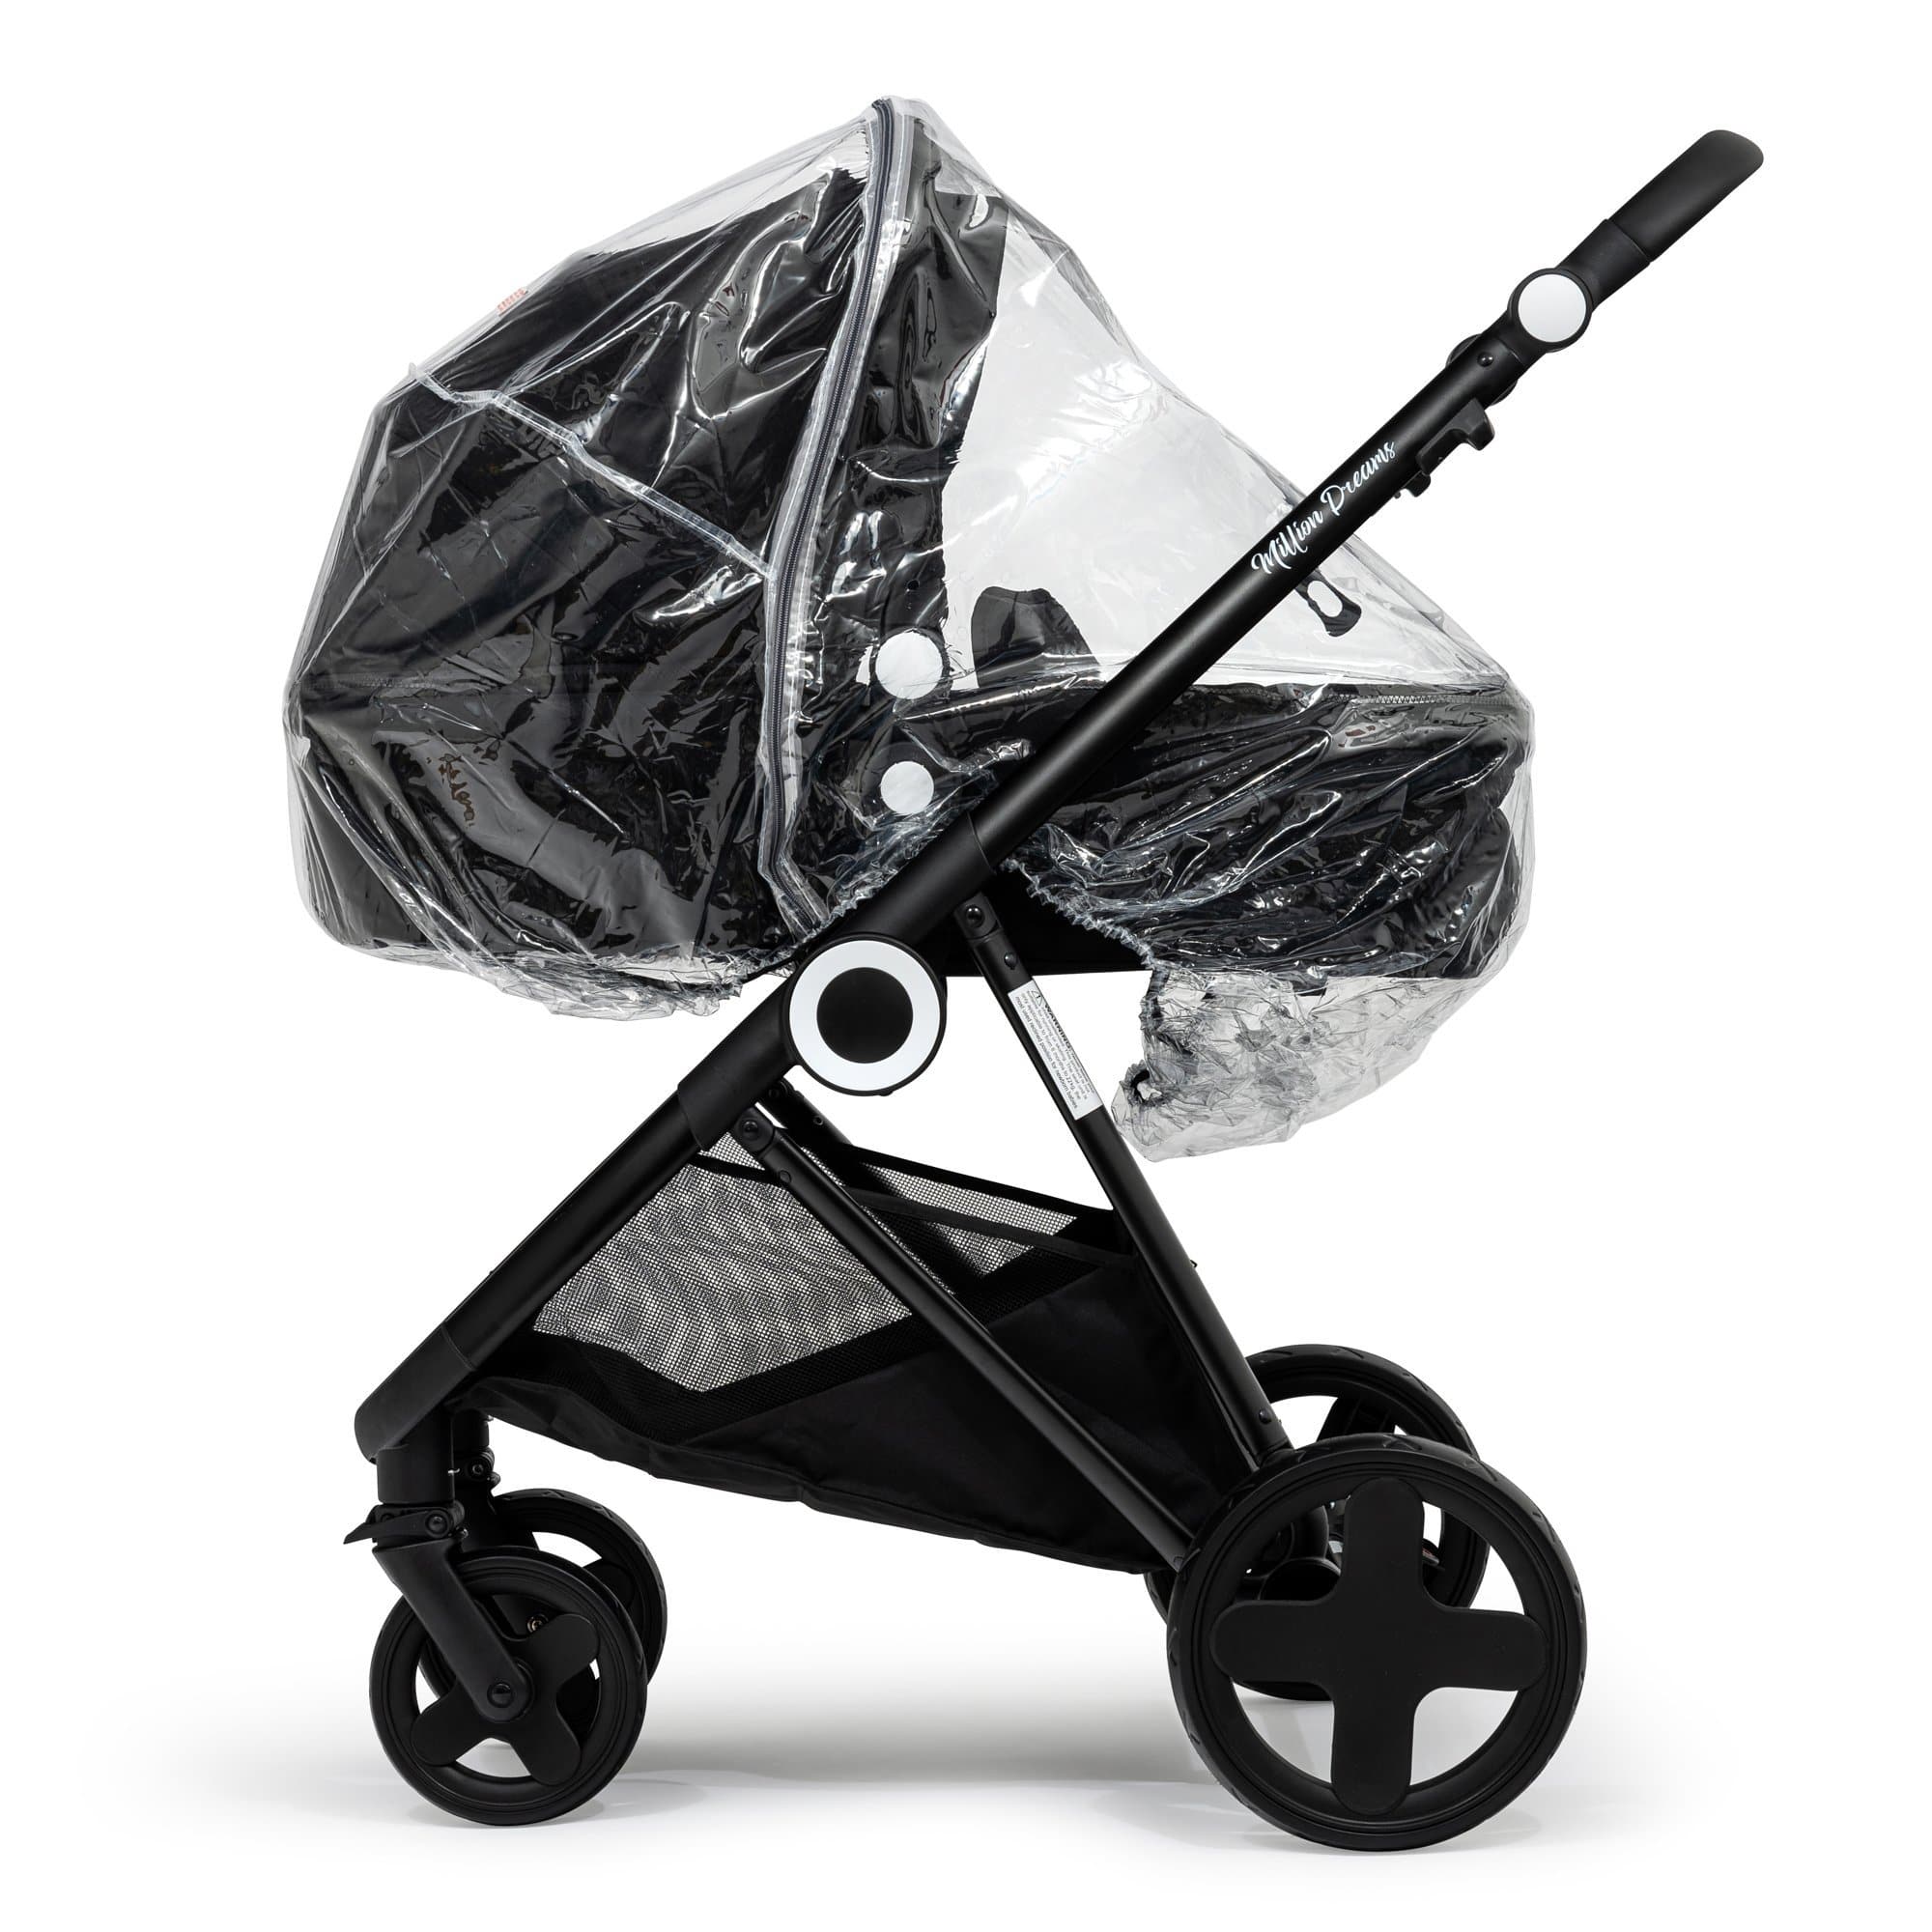 2 in 1 Raincover Compatible with ABC Design - Fits All Models - For Your Little One